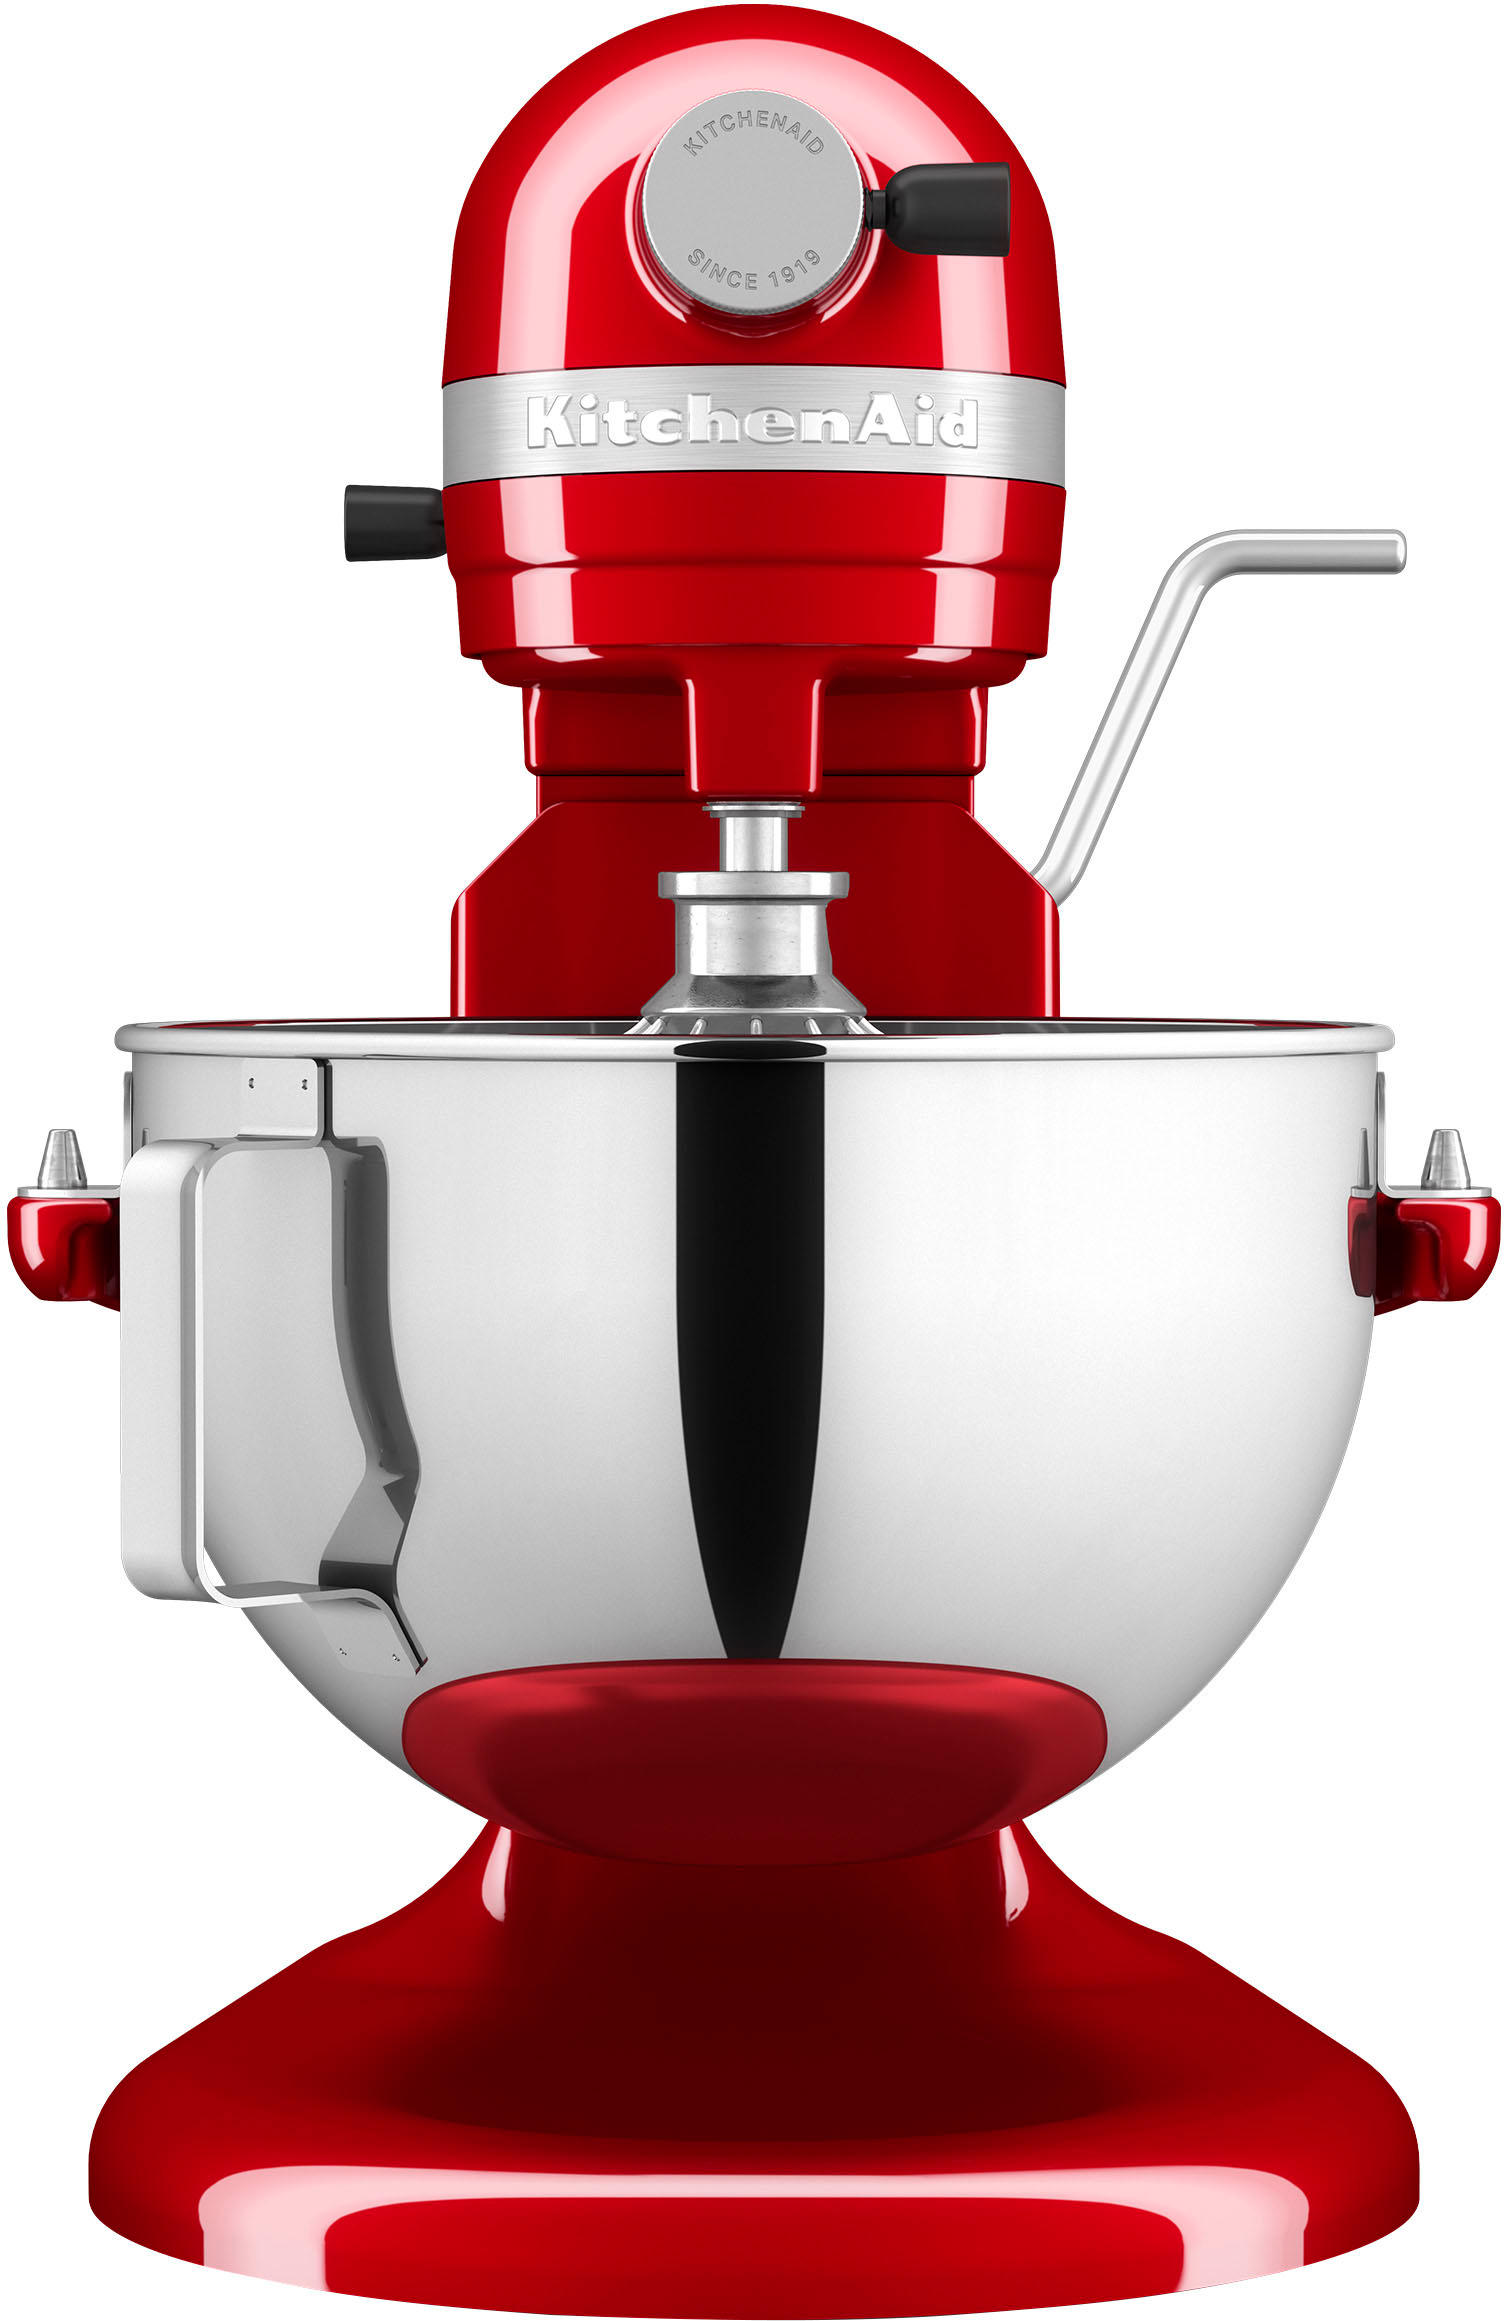 NEW KITCHENAID PROFESSIONAL 5 PLUS BOWL LIFT STAND MIXER (WITH BOX) - RED -  Earl's Auction Company